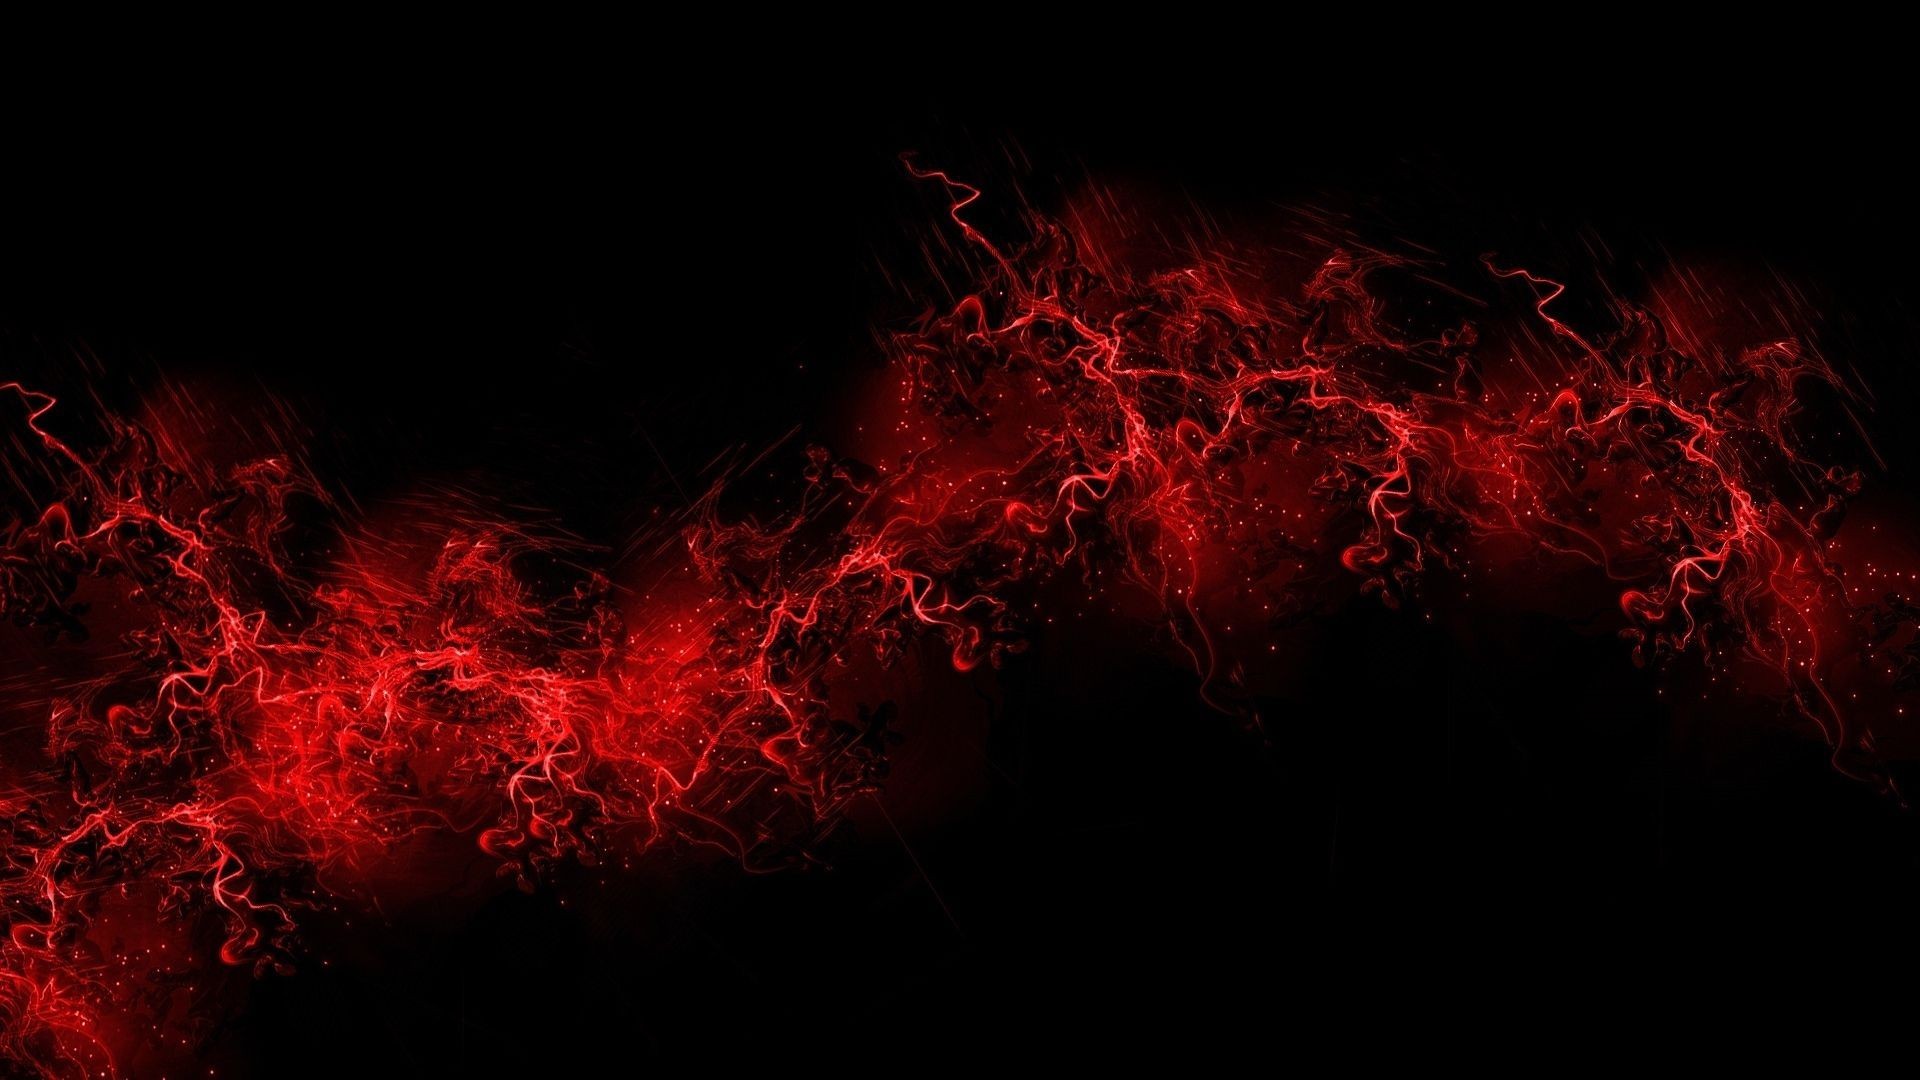 Red Aesthetic Background Wallpaper HD with high-resolution 1920x1080 pixel. You can use this wallpaper for your Desktop Computer Backgrounds, Mac Wallpapers, Android Lock screen or iPhone Screensavers and another smartphone device